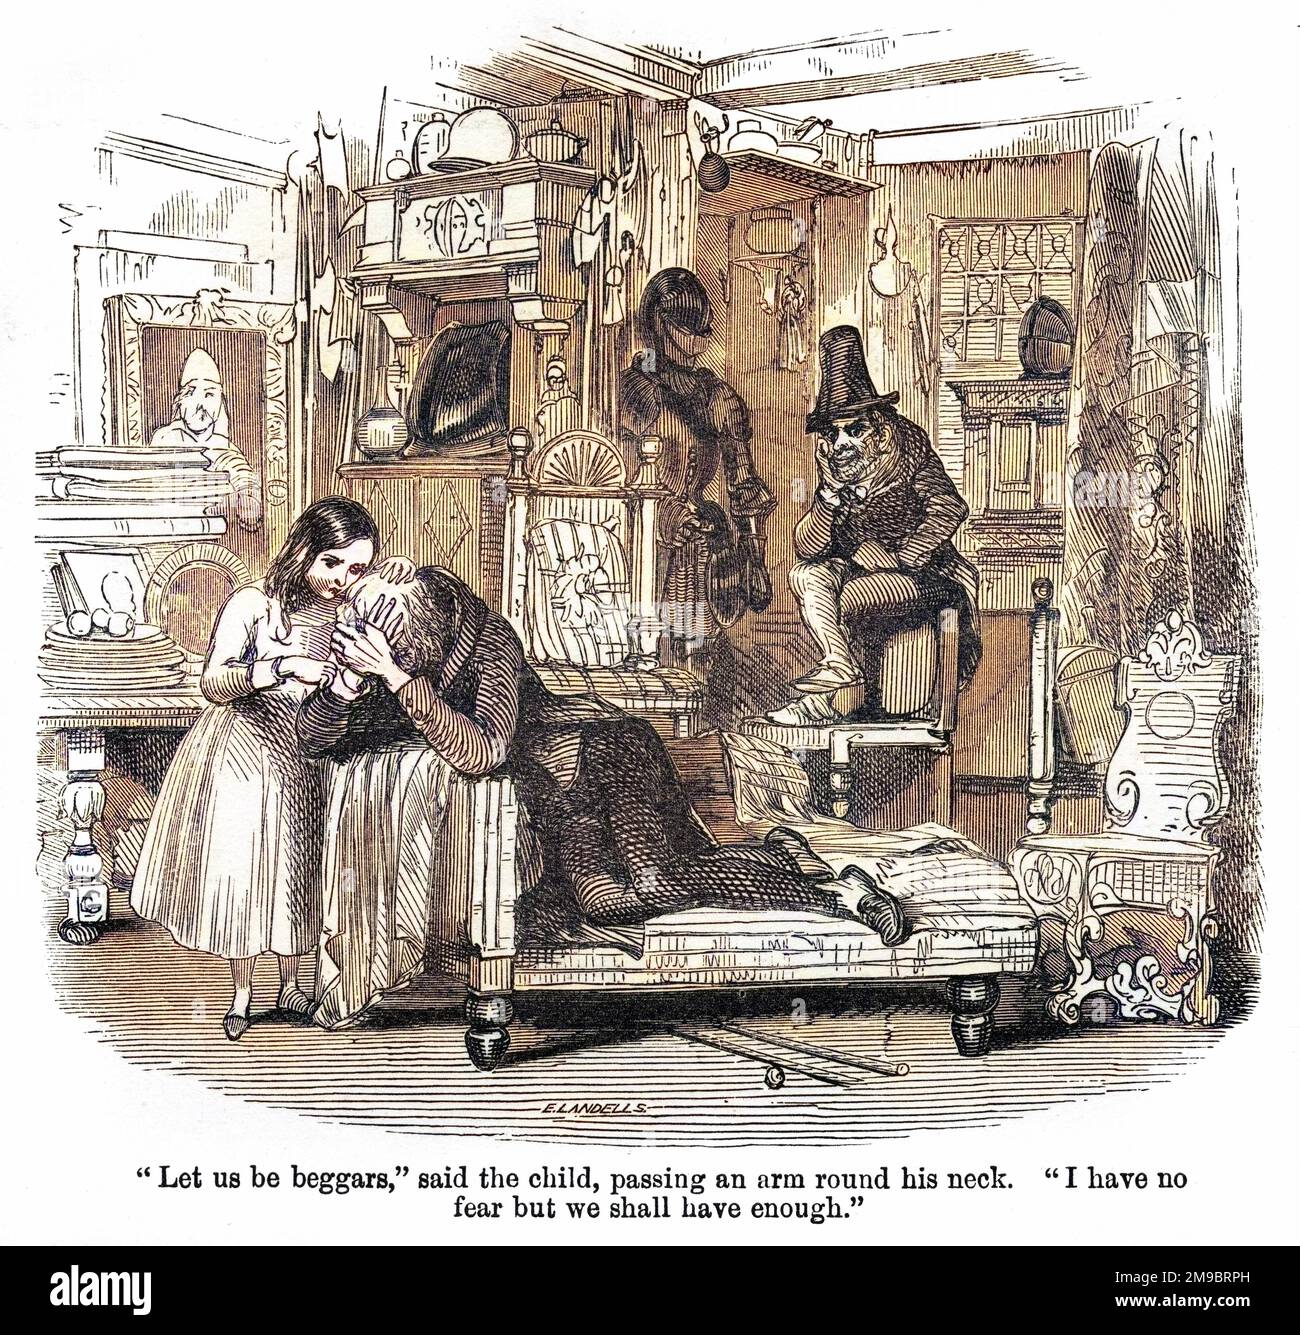 The Old Curiosity Shop by Charles Dickens, first published in the weekly serial Master Humphrey's Clock from 1840 to 1841 and then as its own book in 1841. 'Let us be beggars,' said the child, passing an arm around his neck. 'I have no fear but we shall have enough.' Nell comforts her grandfather in the shop while the malicious dwarf moneylender Daniel Quilp perches on the back of an armchair and watches them. Stock Photo